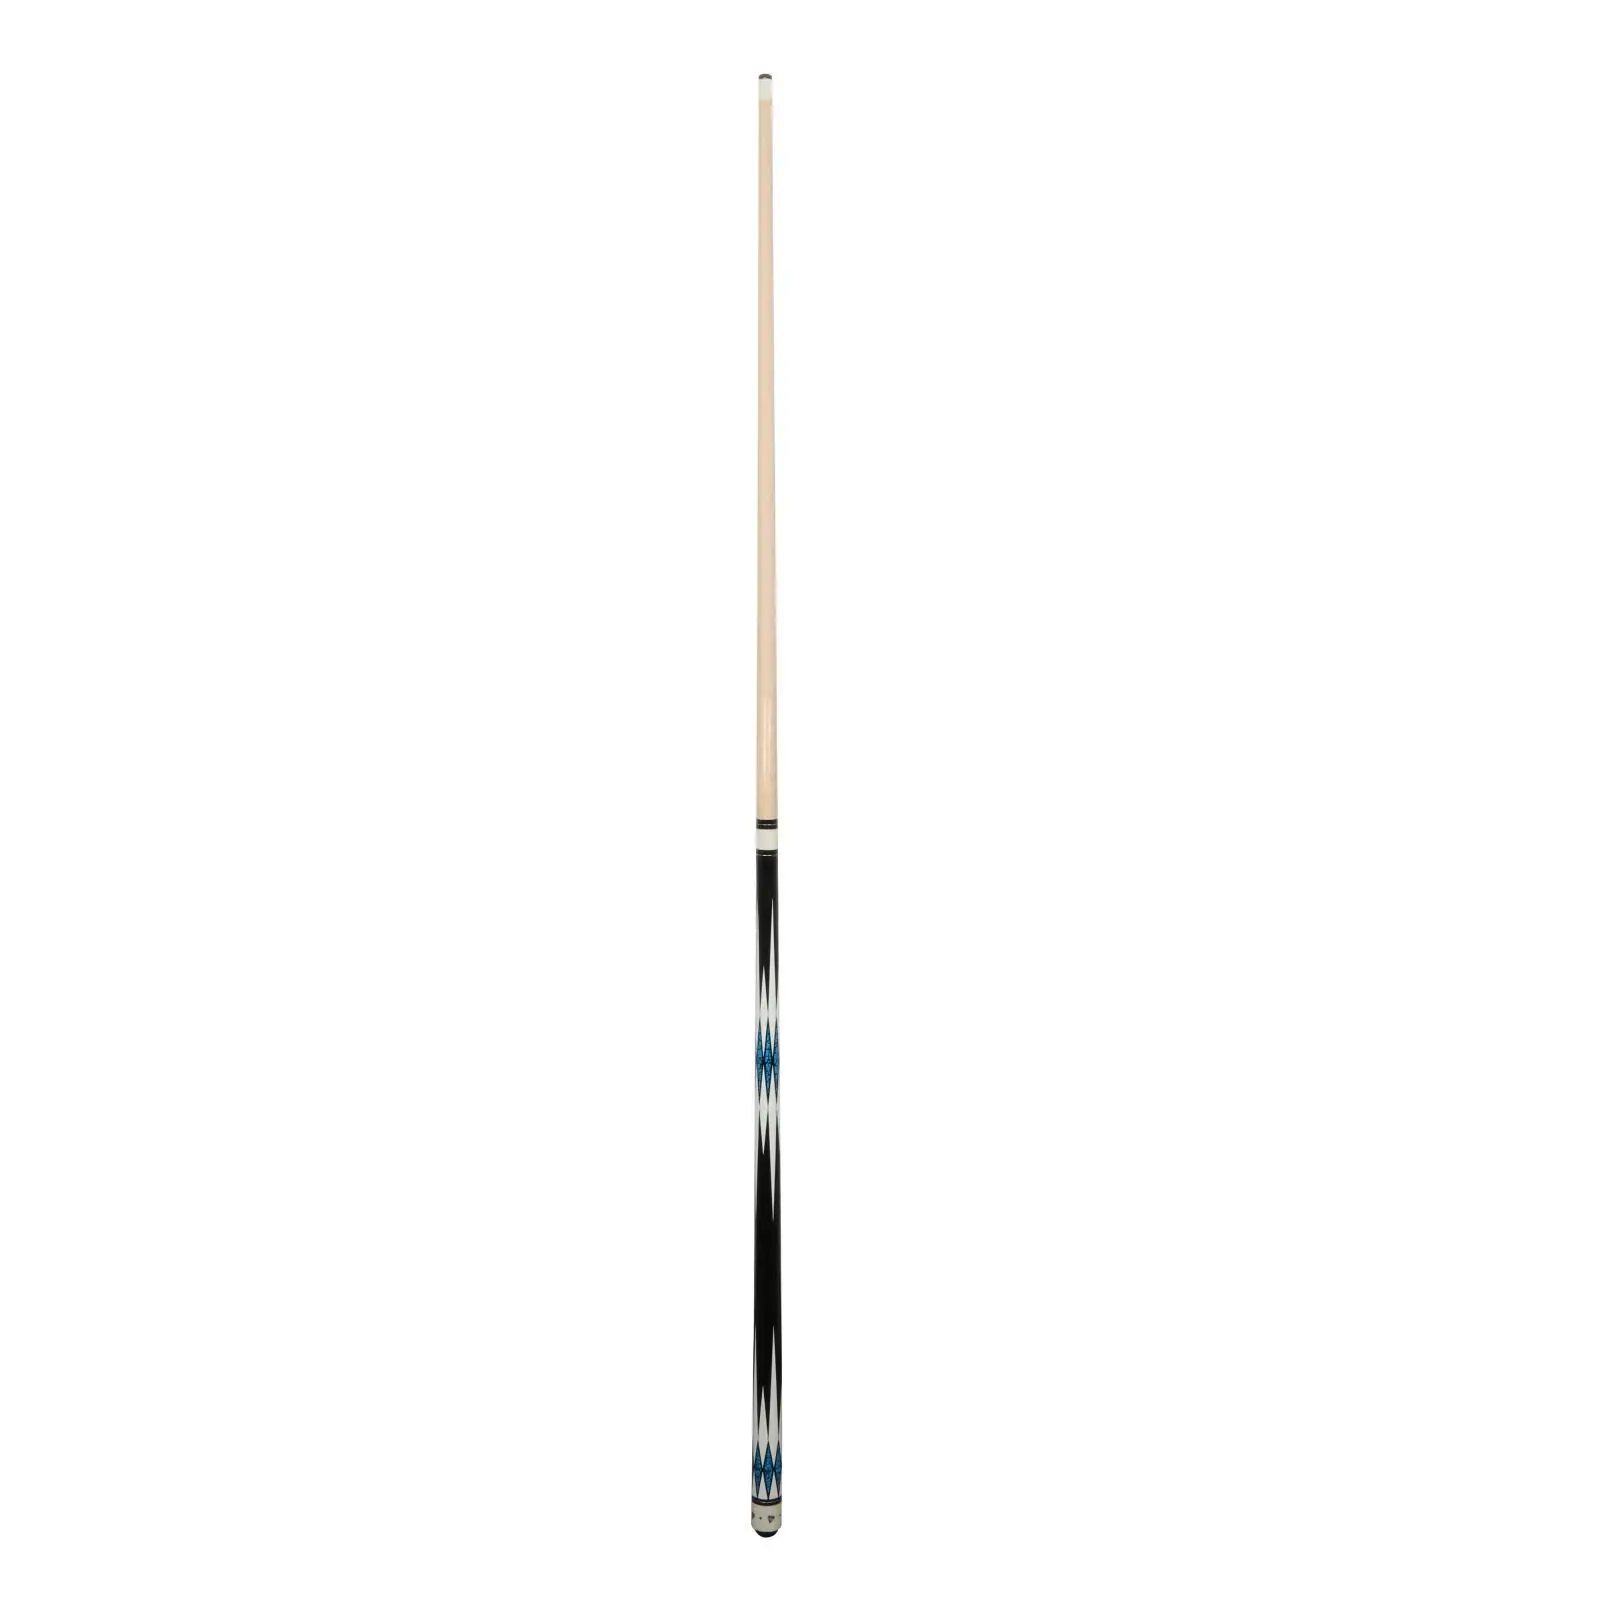 Pool Cue Maple 1/2 Nine Ball Pool Cue British Snooker Cue for Unisex Adult